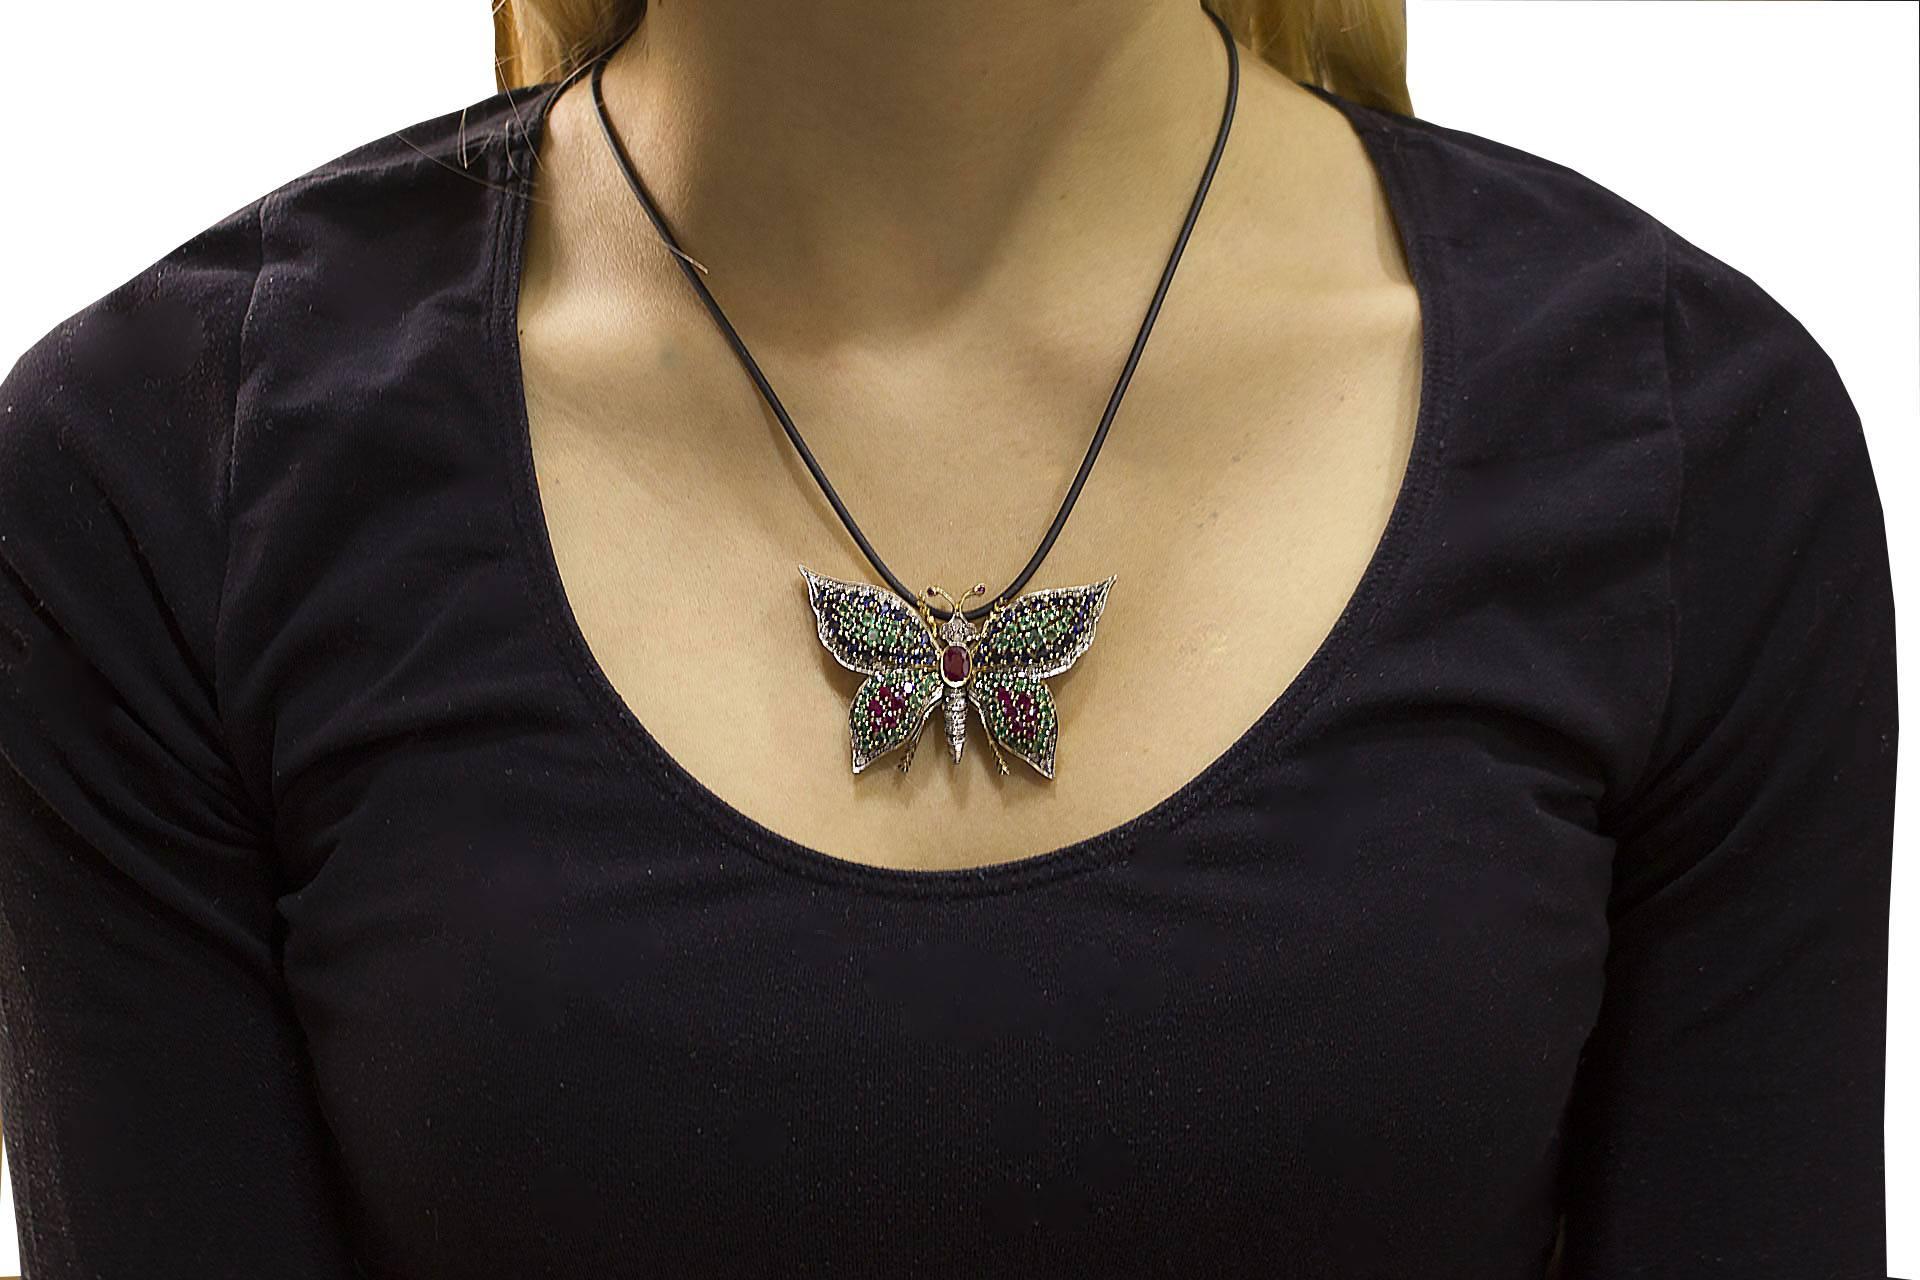  Rubies Emeralds Blue Sapphires Butterfly Pendant Necklace/Brooch 9